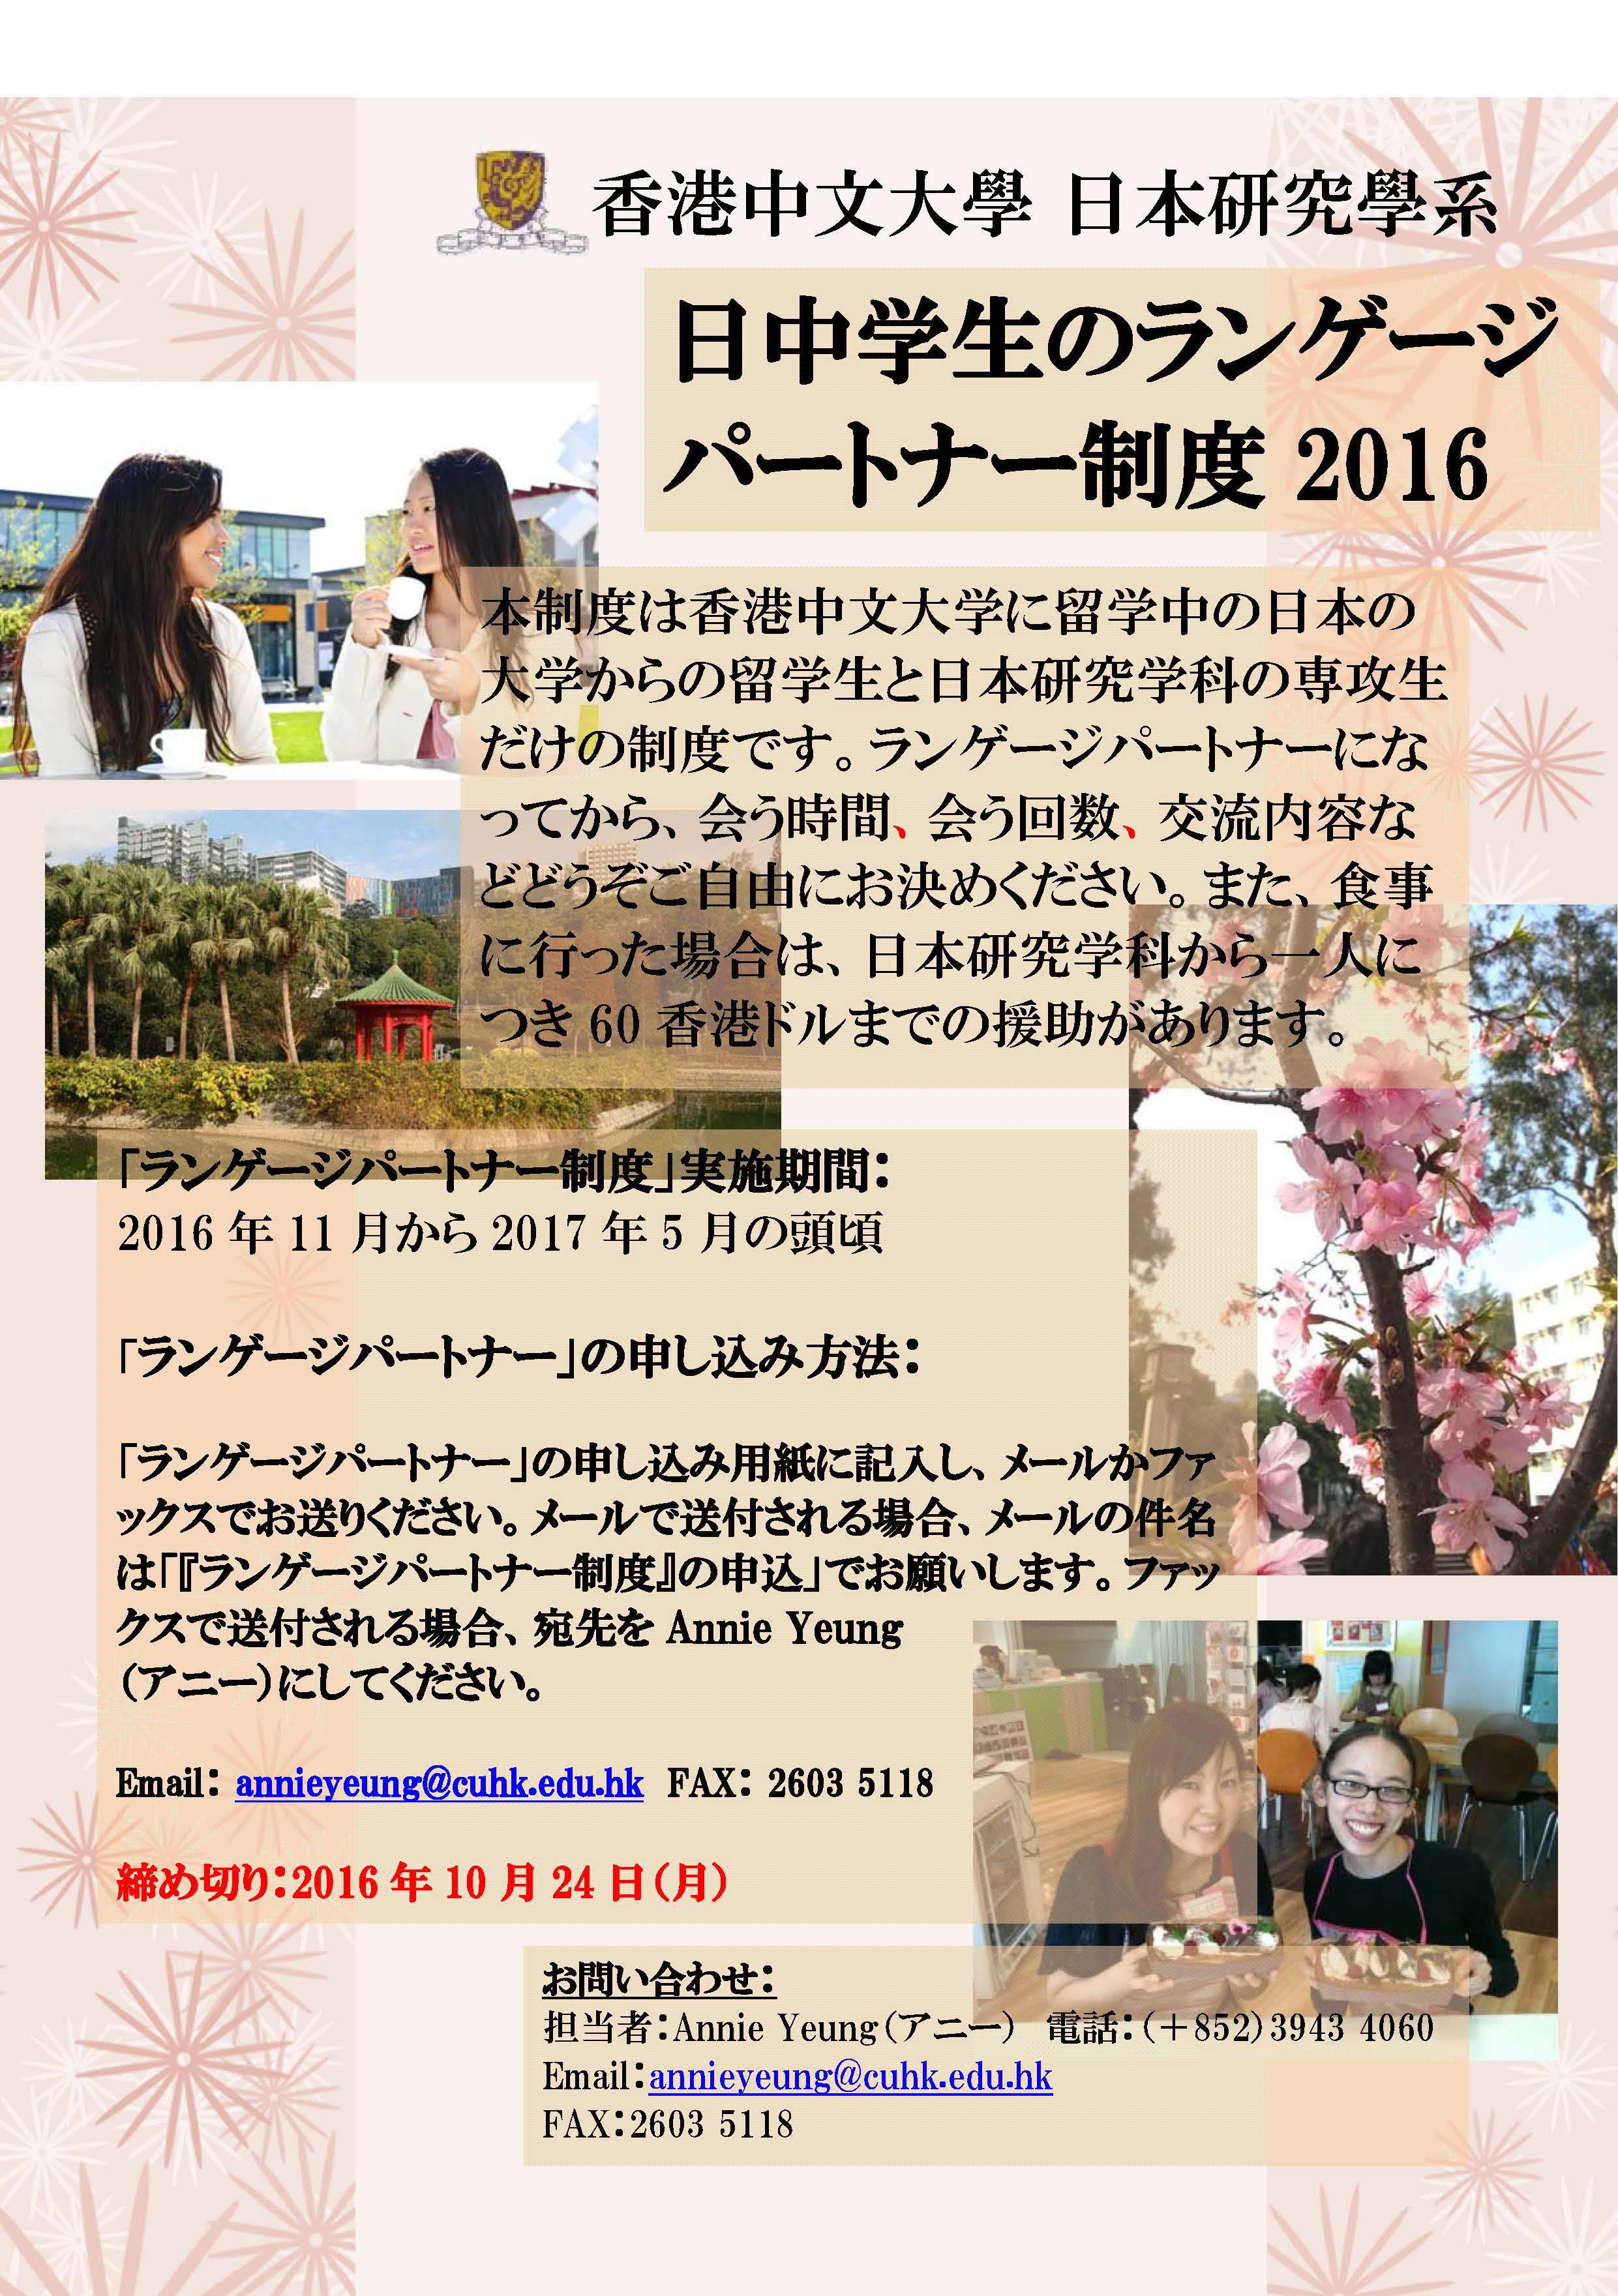 2016 JAS Language Partner System Starts (Available in Japanese only) | Department of Japanese Studies, CUHK